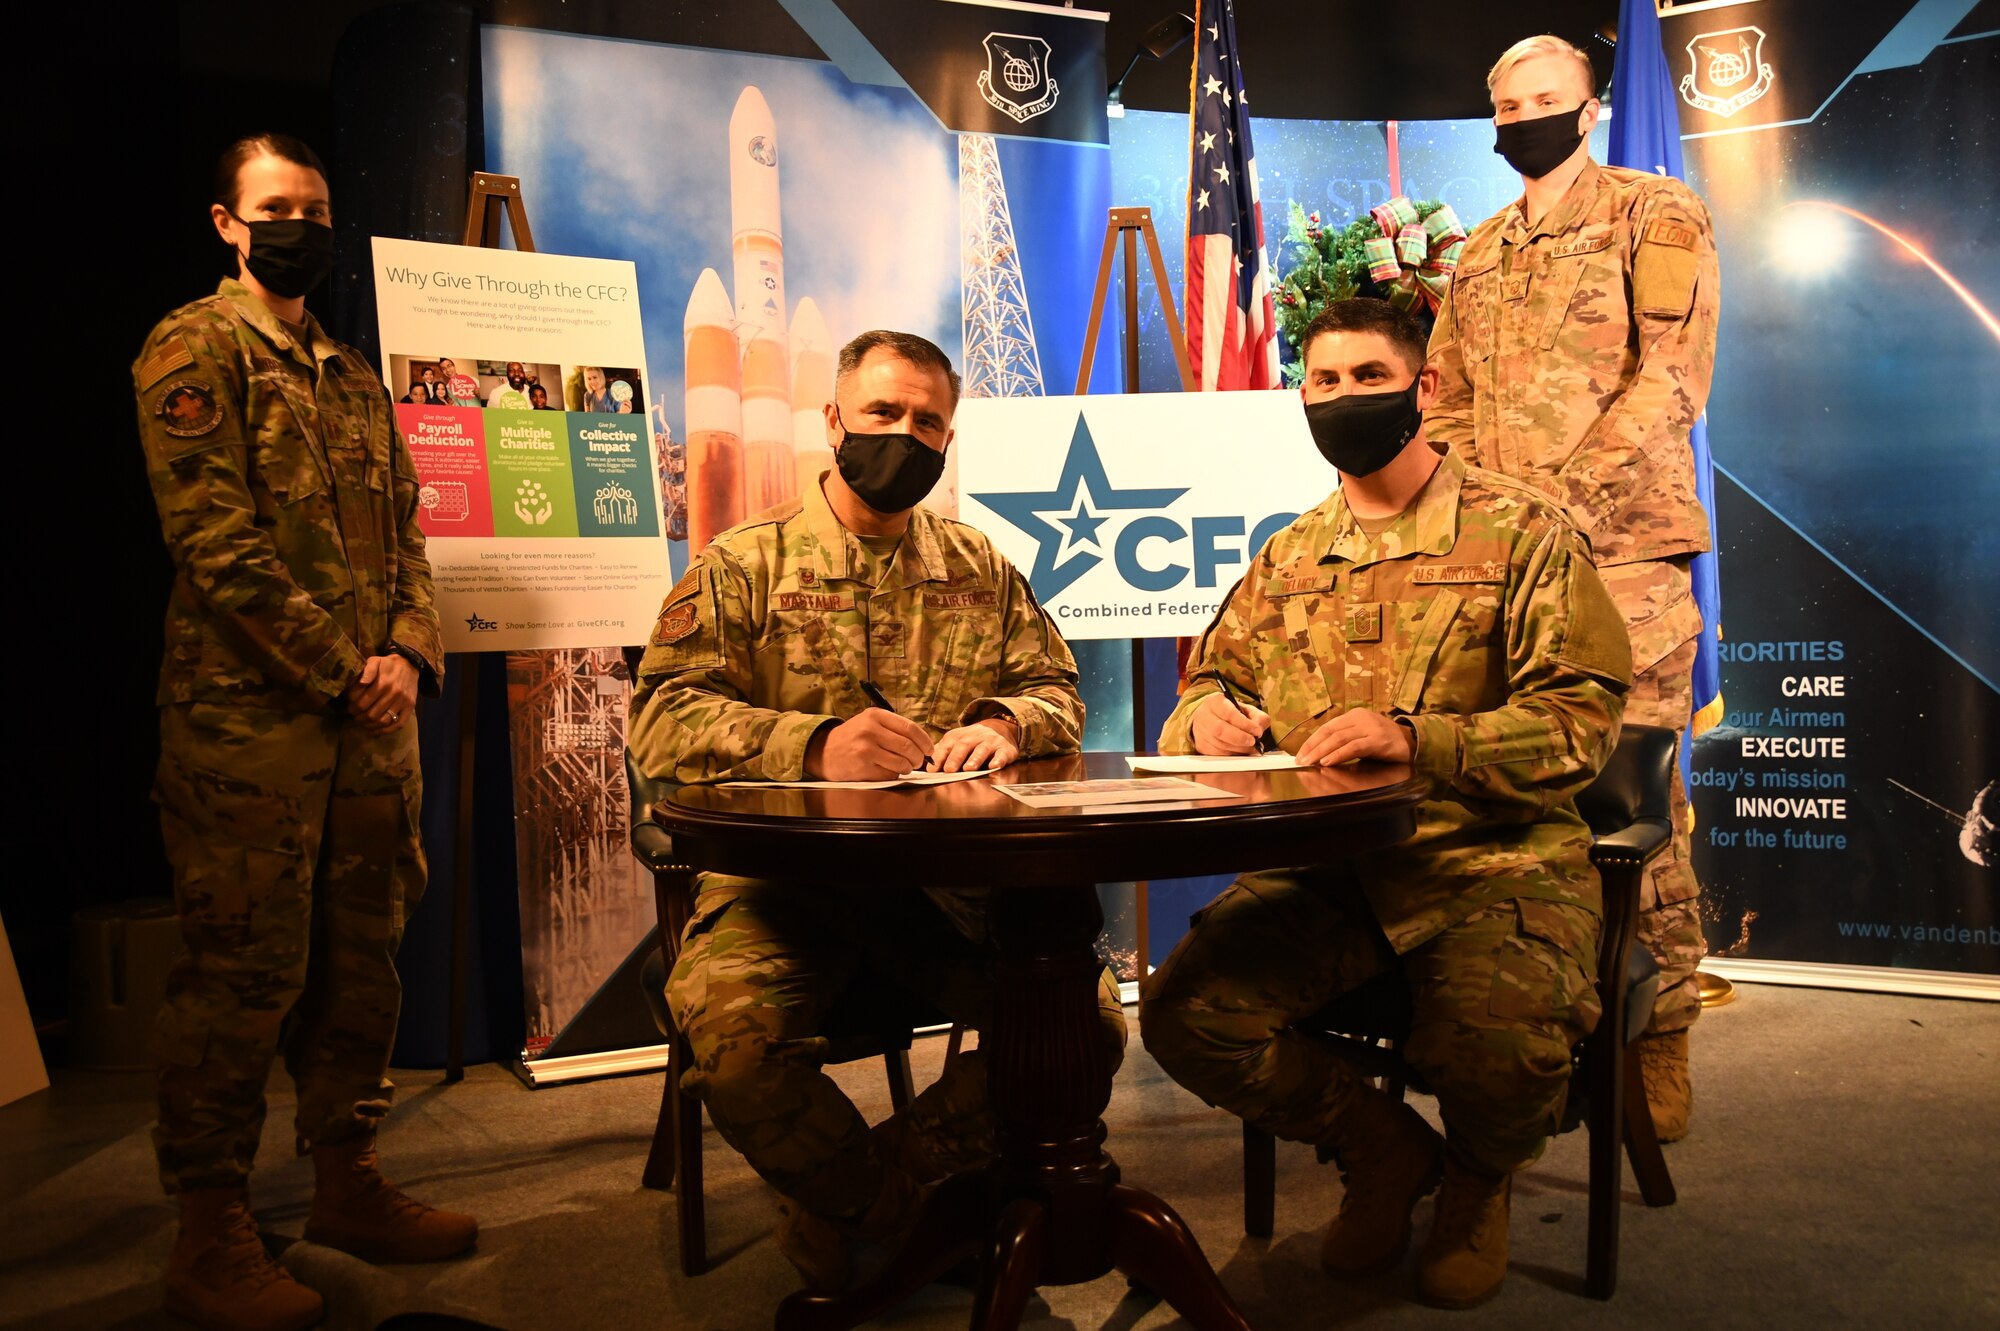 Col. Anthony Mastalir, 30th Space Wing commander, and Chief Master Sgt. Justin DeLucy, 30th SW command chief, sign the proclamation to kick-off the Combined Federal Campaign Dec. 11, 2020, at Vandenberg Air Force Base, Calif.